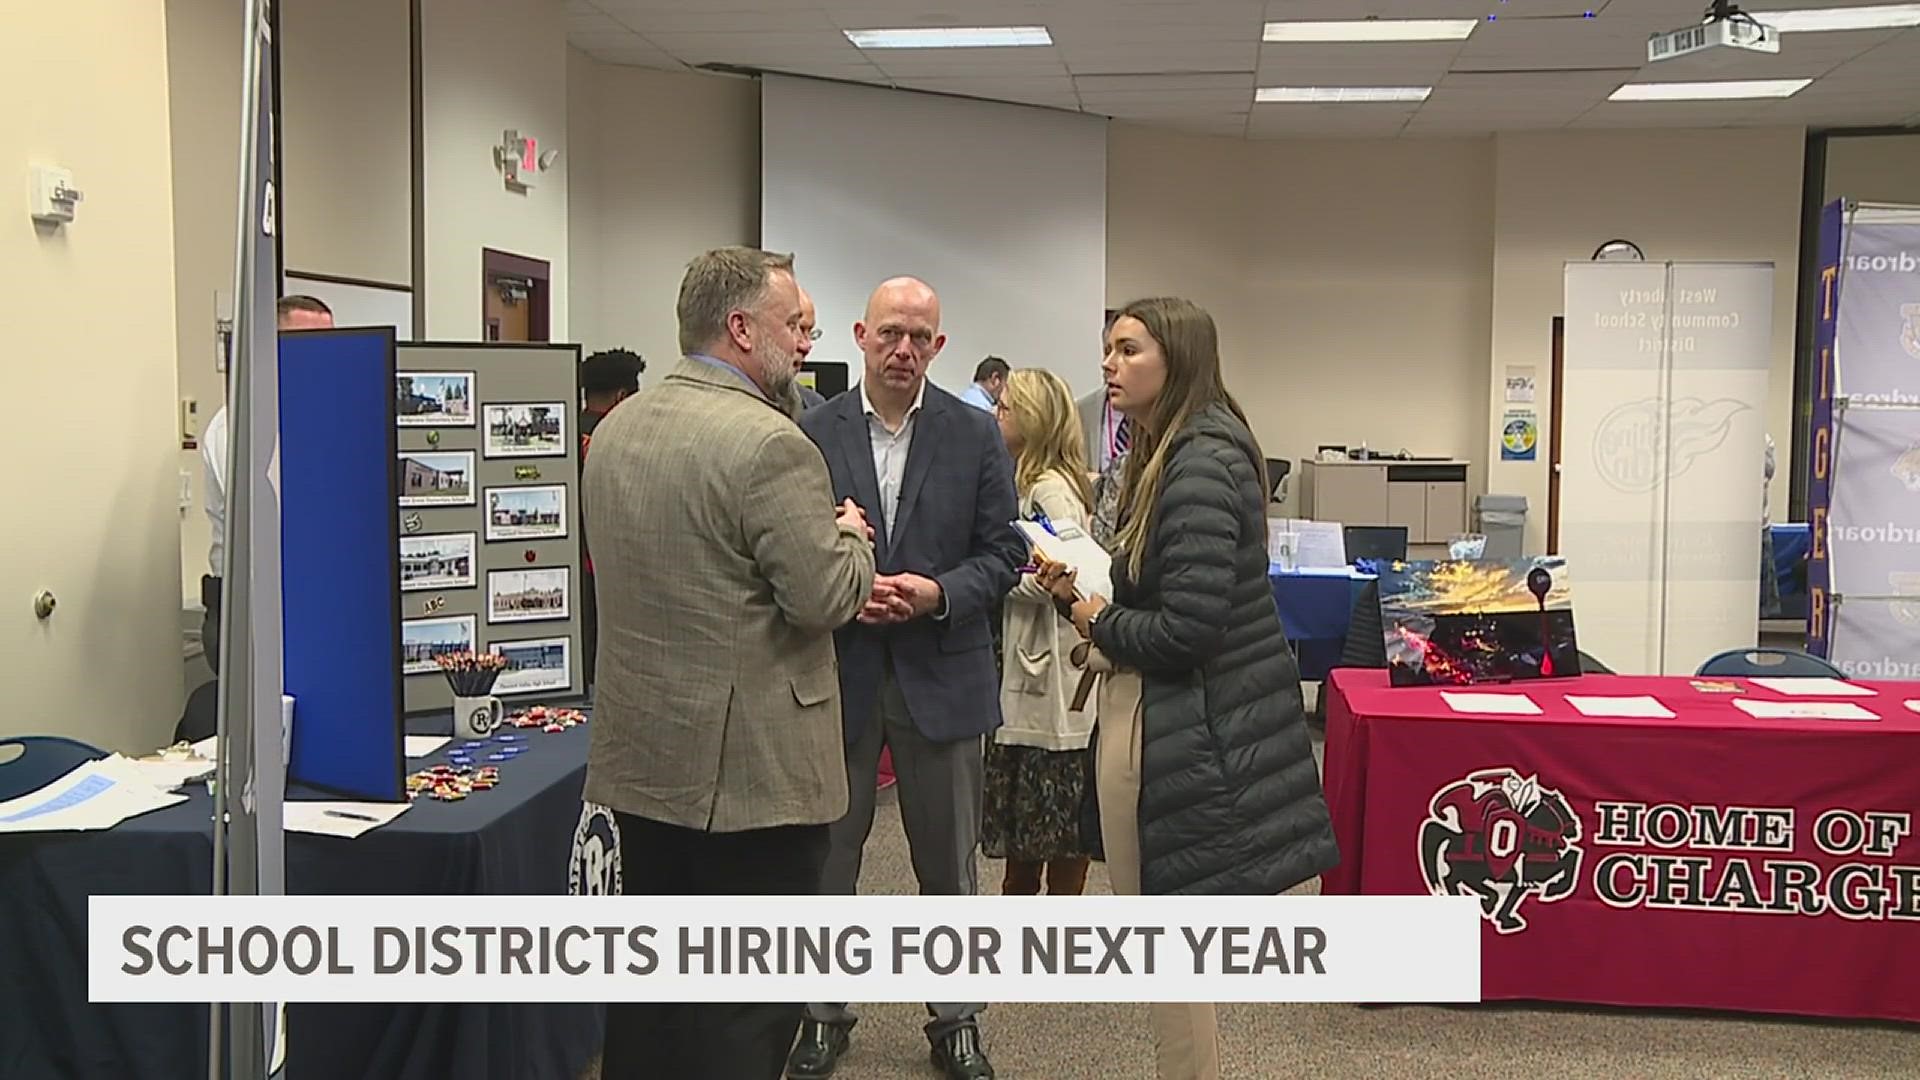 Eighteen school districts attended the Mississippi Bend Area Education Agency teacher job fair, meeting with around three dozen potential applicants.